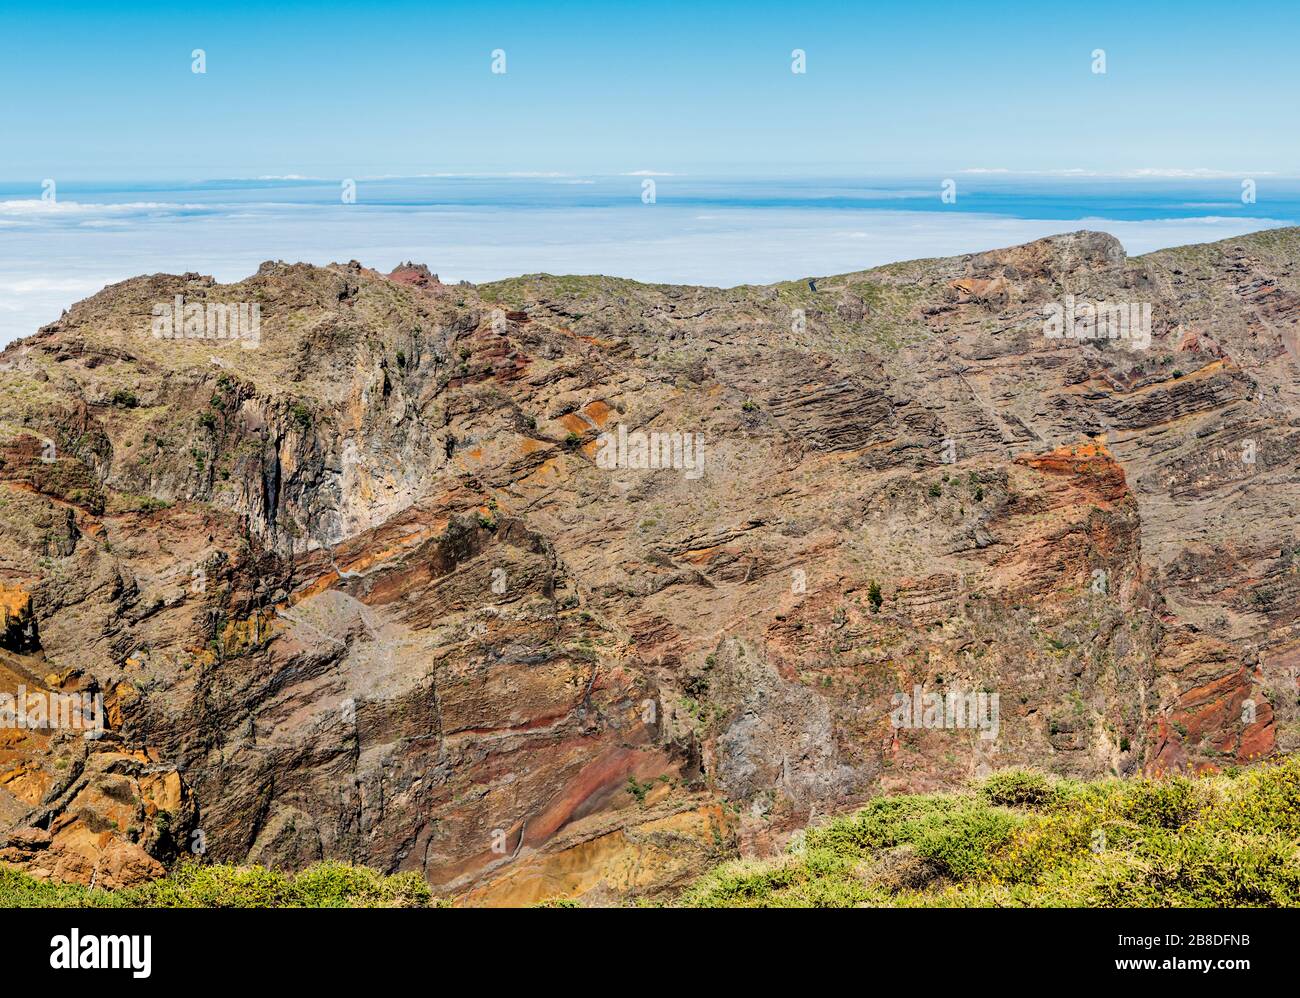 Part of the wall of the Caldera de Taburiente, a giant volcanic structure in La Palma, Canary Islands, from Roque de los Muchachos Stock Photo